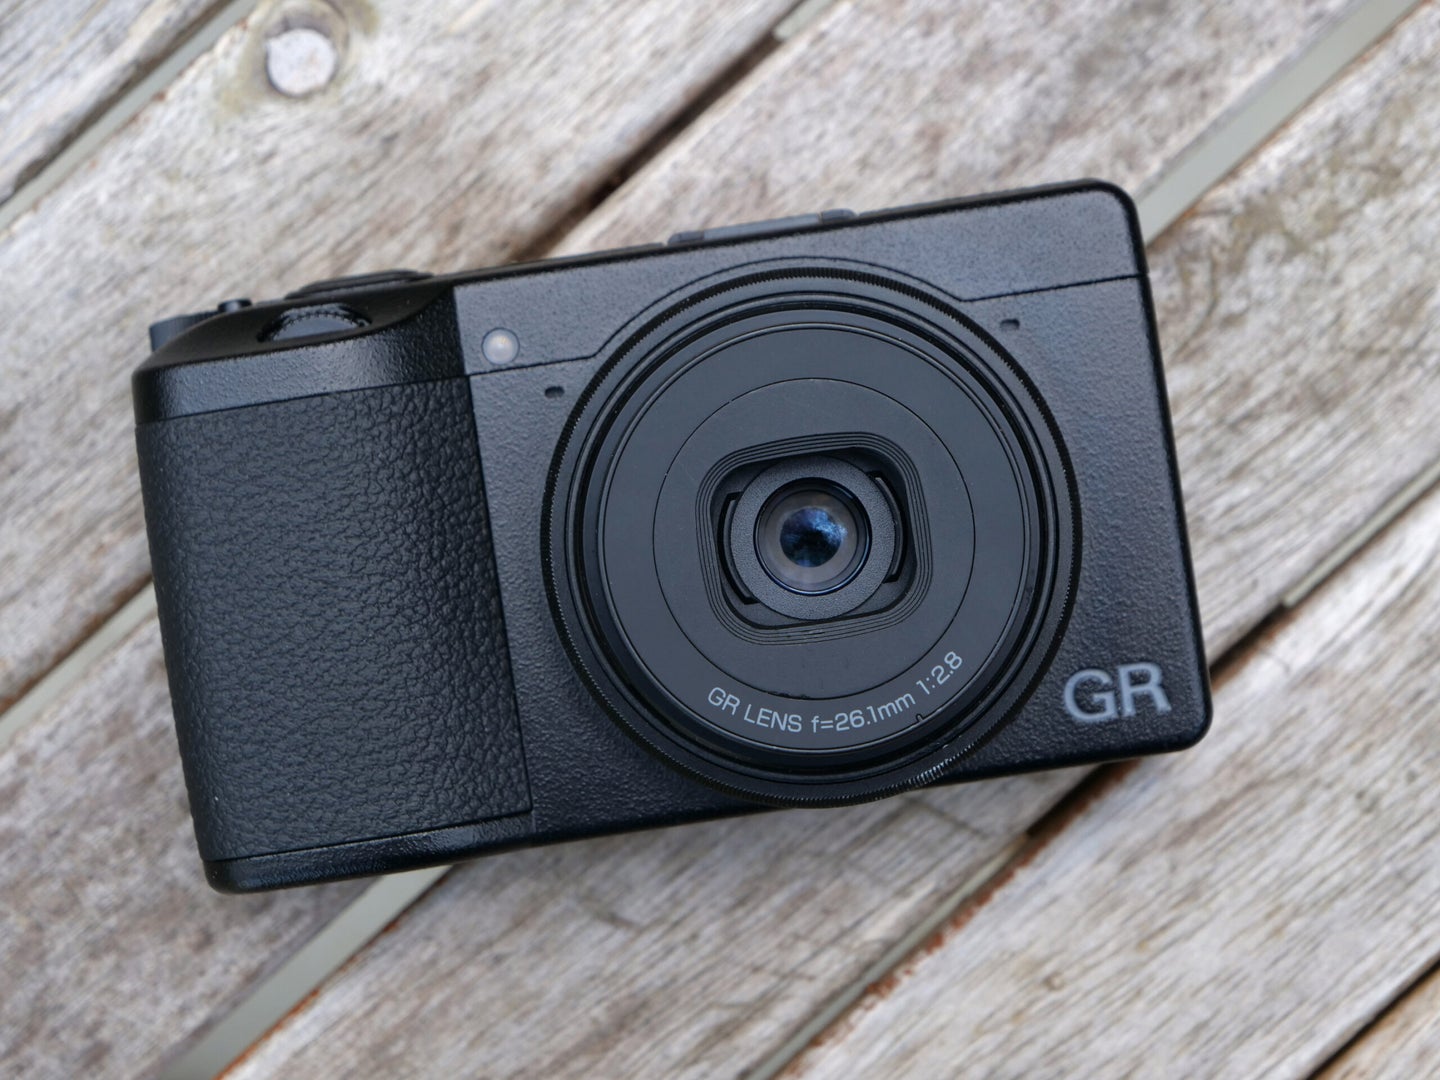 Ricoh GR IIIx review: a compact & capable camera